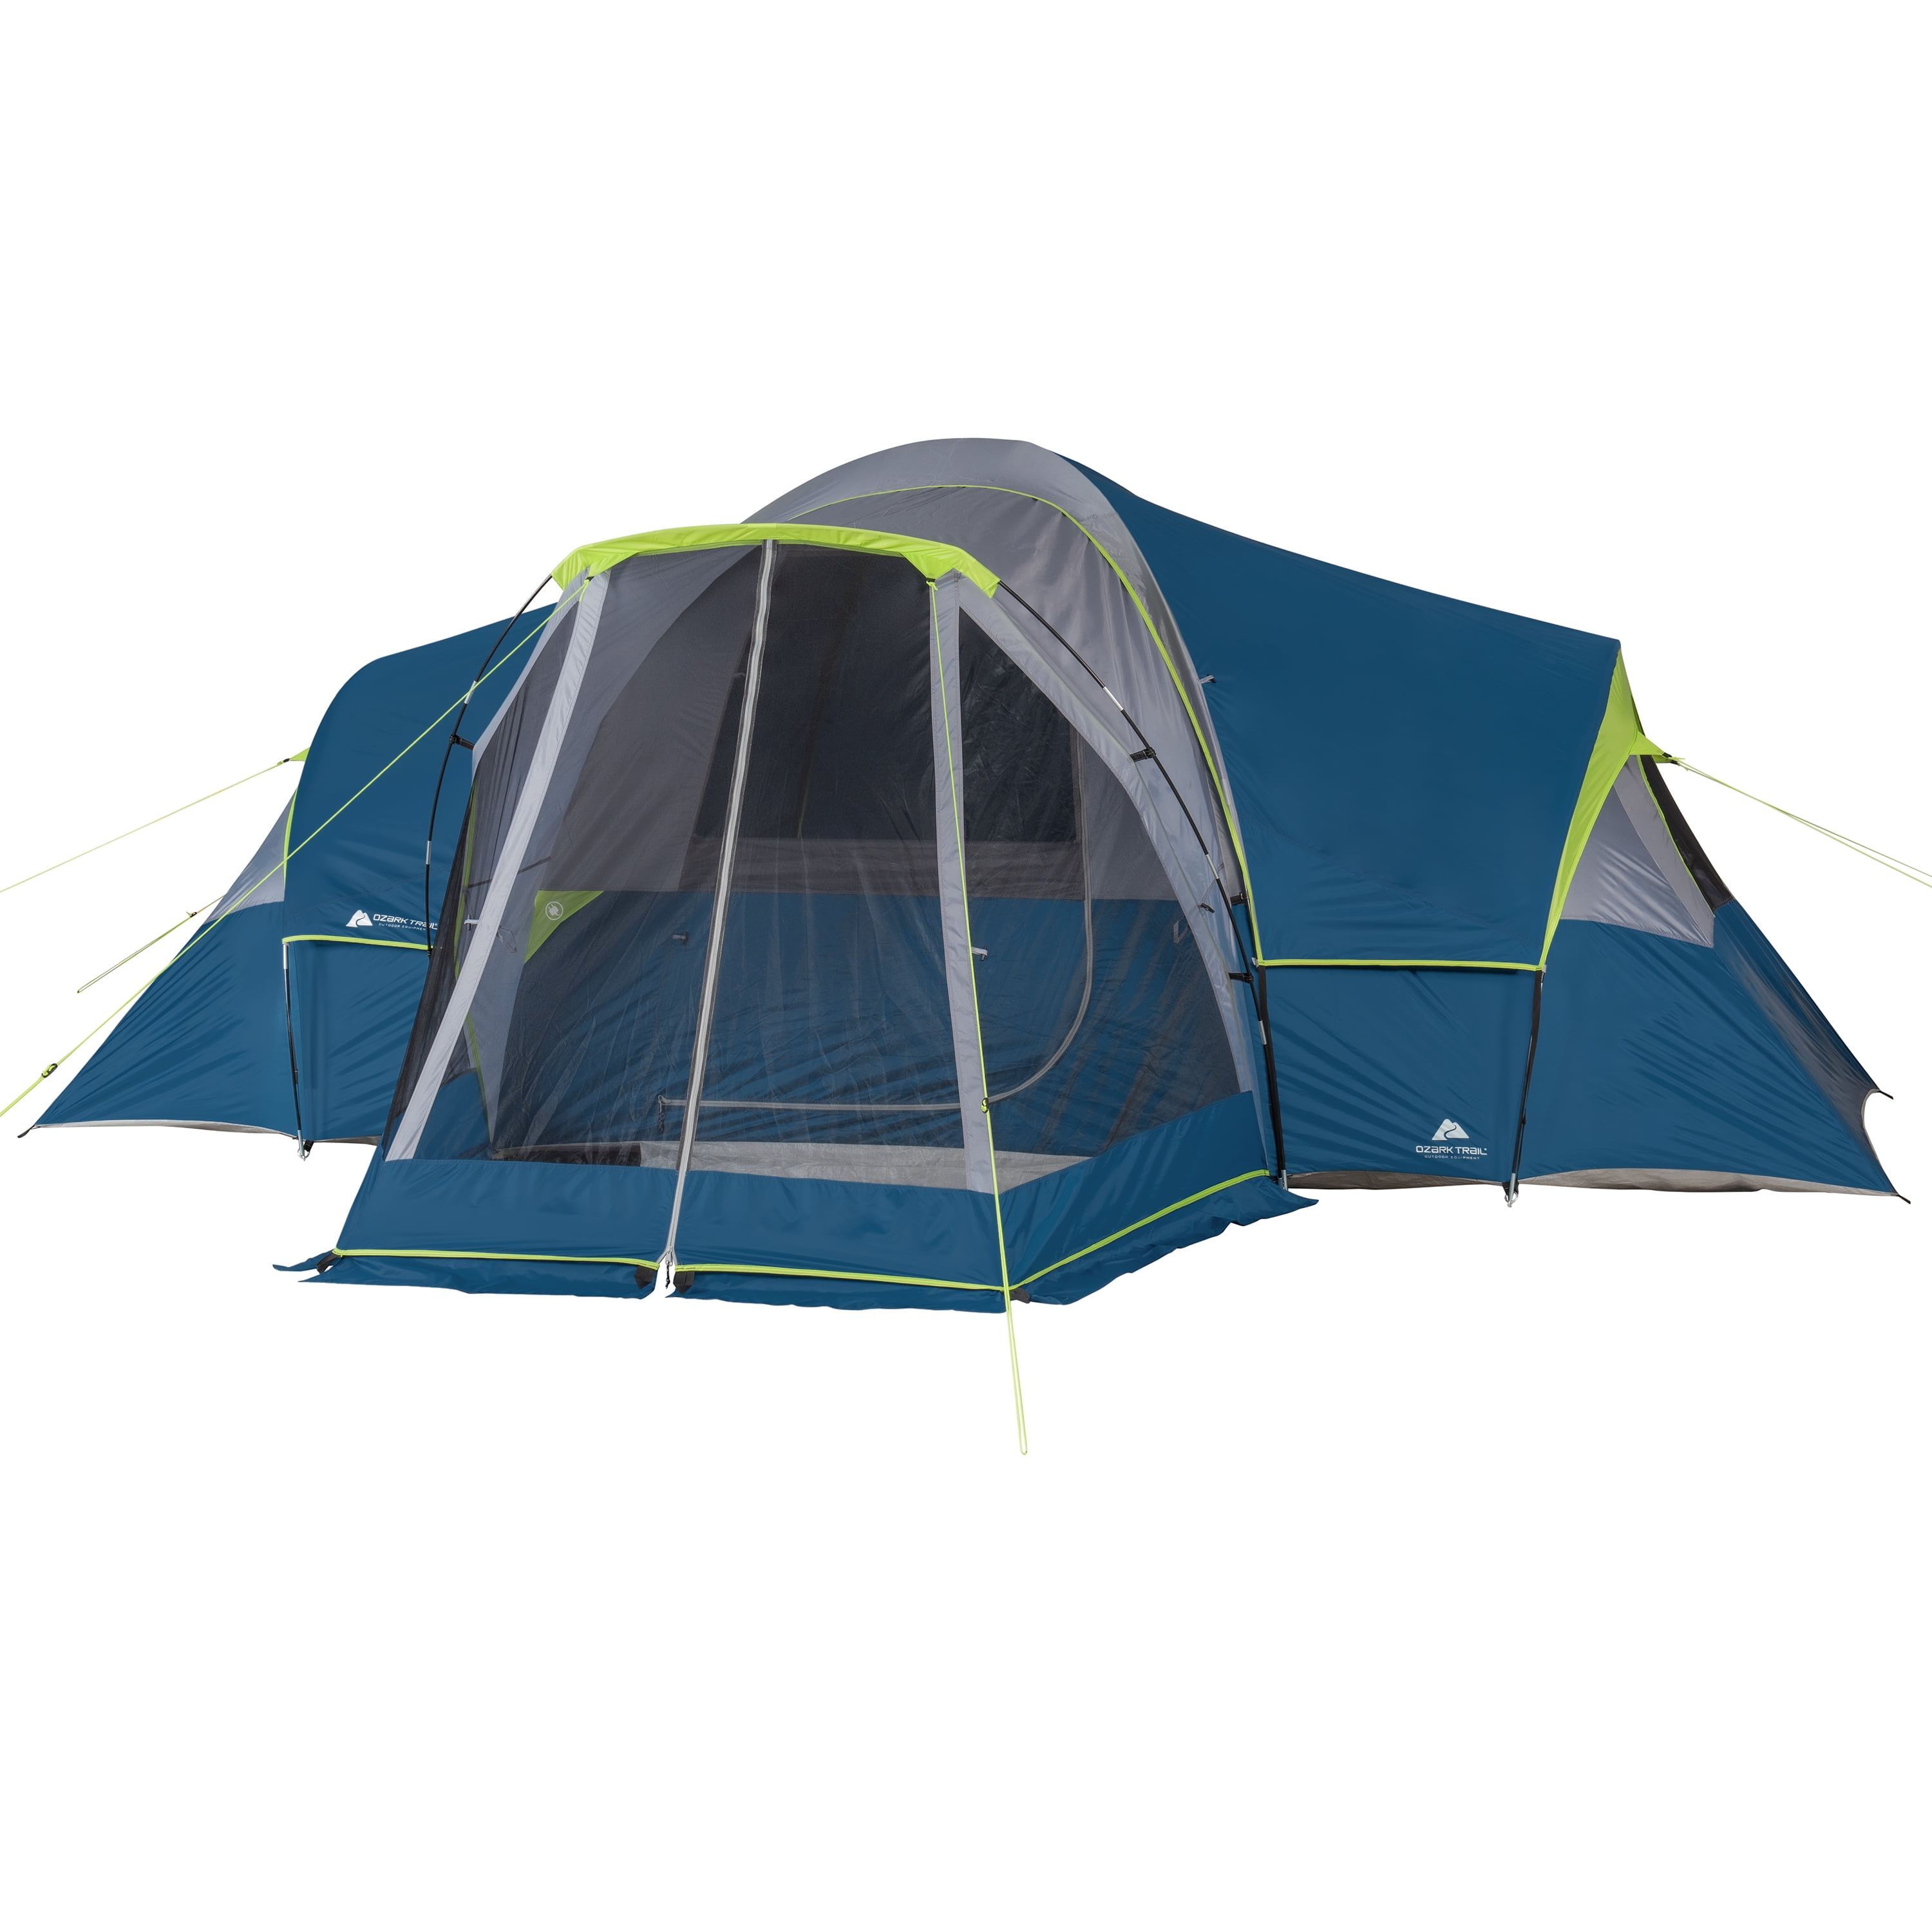 Large Tent Camping Outdoor Ozark Trail 3 Room 10 Person Waterproof 